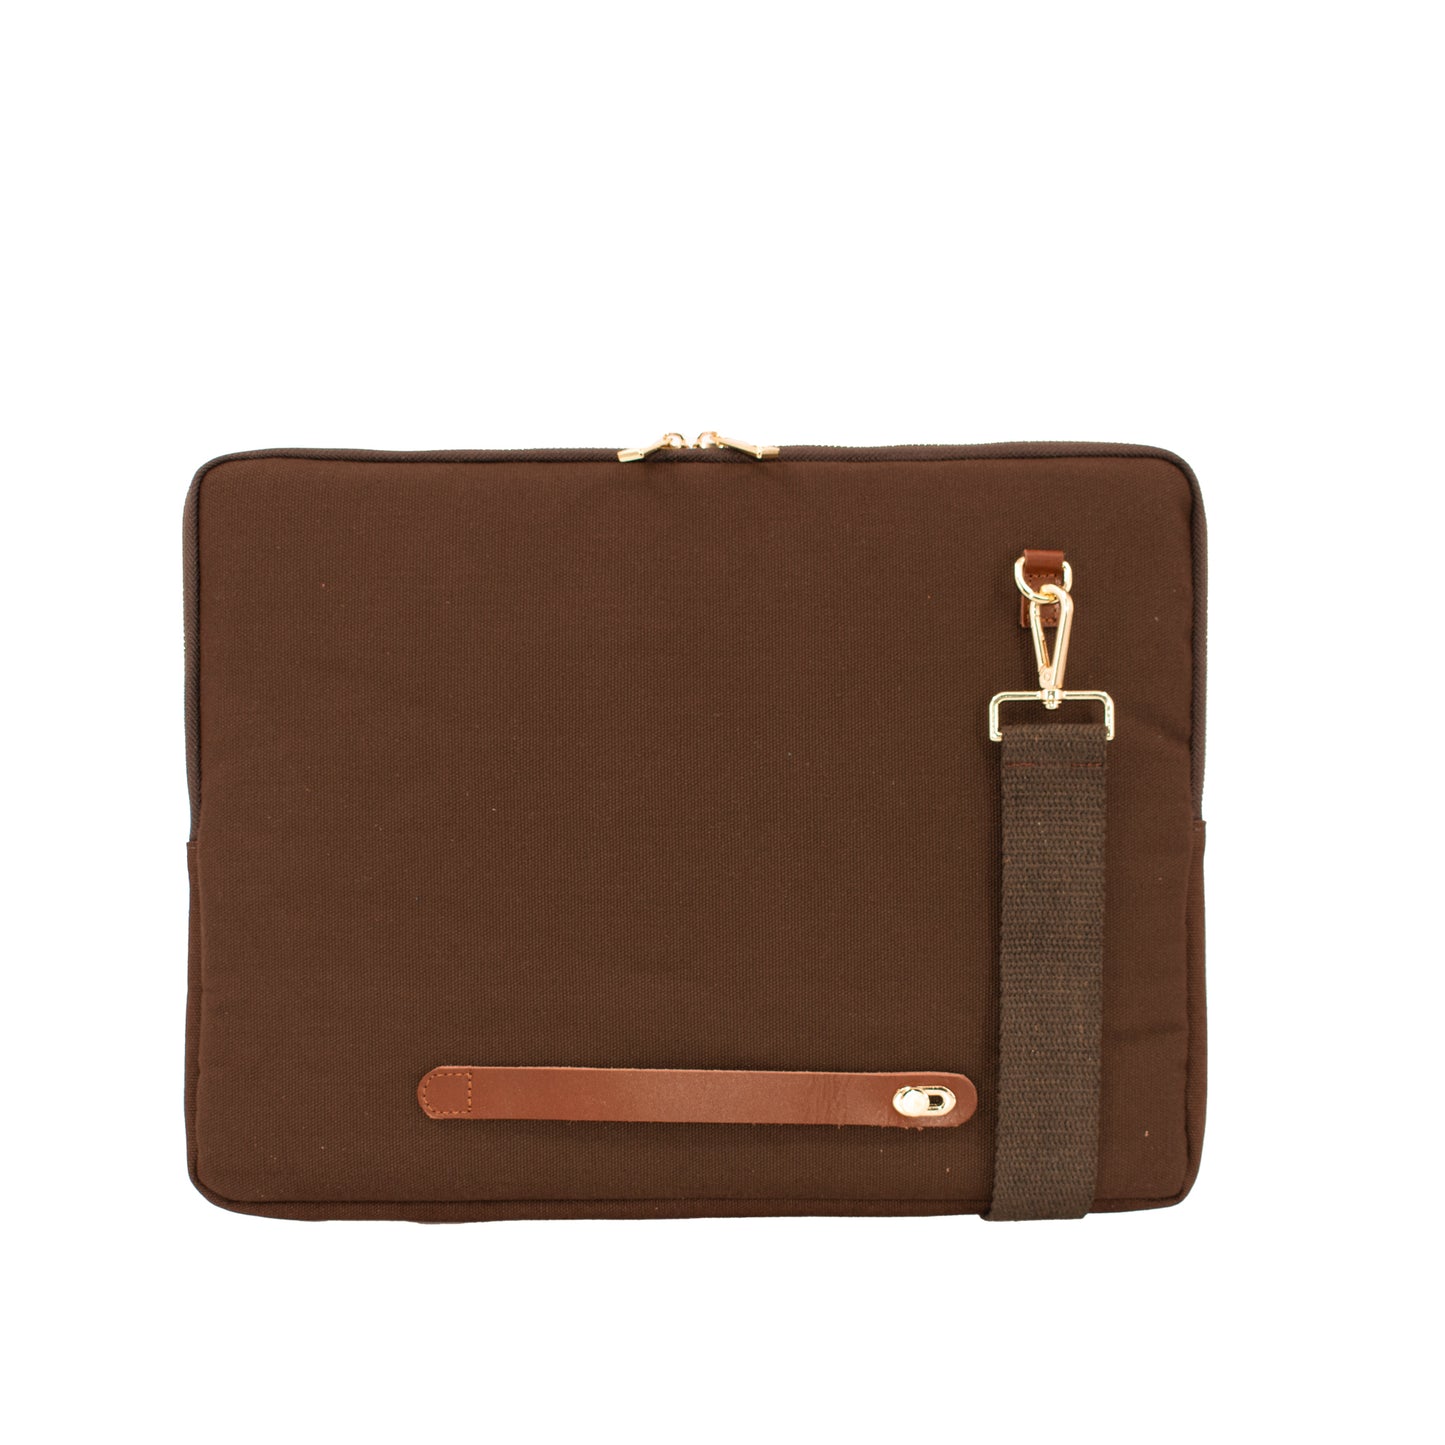 HCANSS BROWN CANVAS LAPTOP SLEEVE